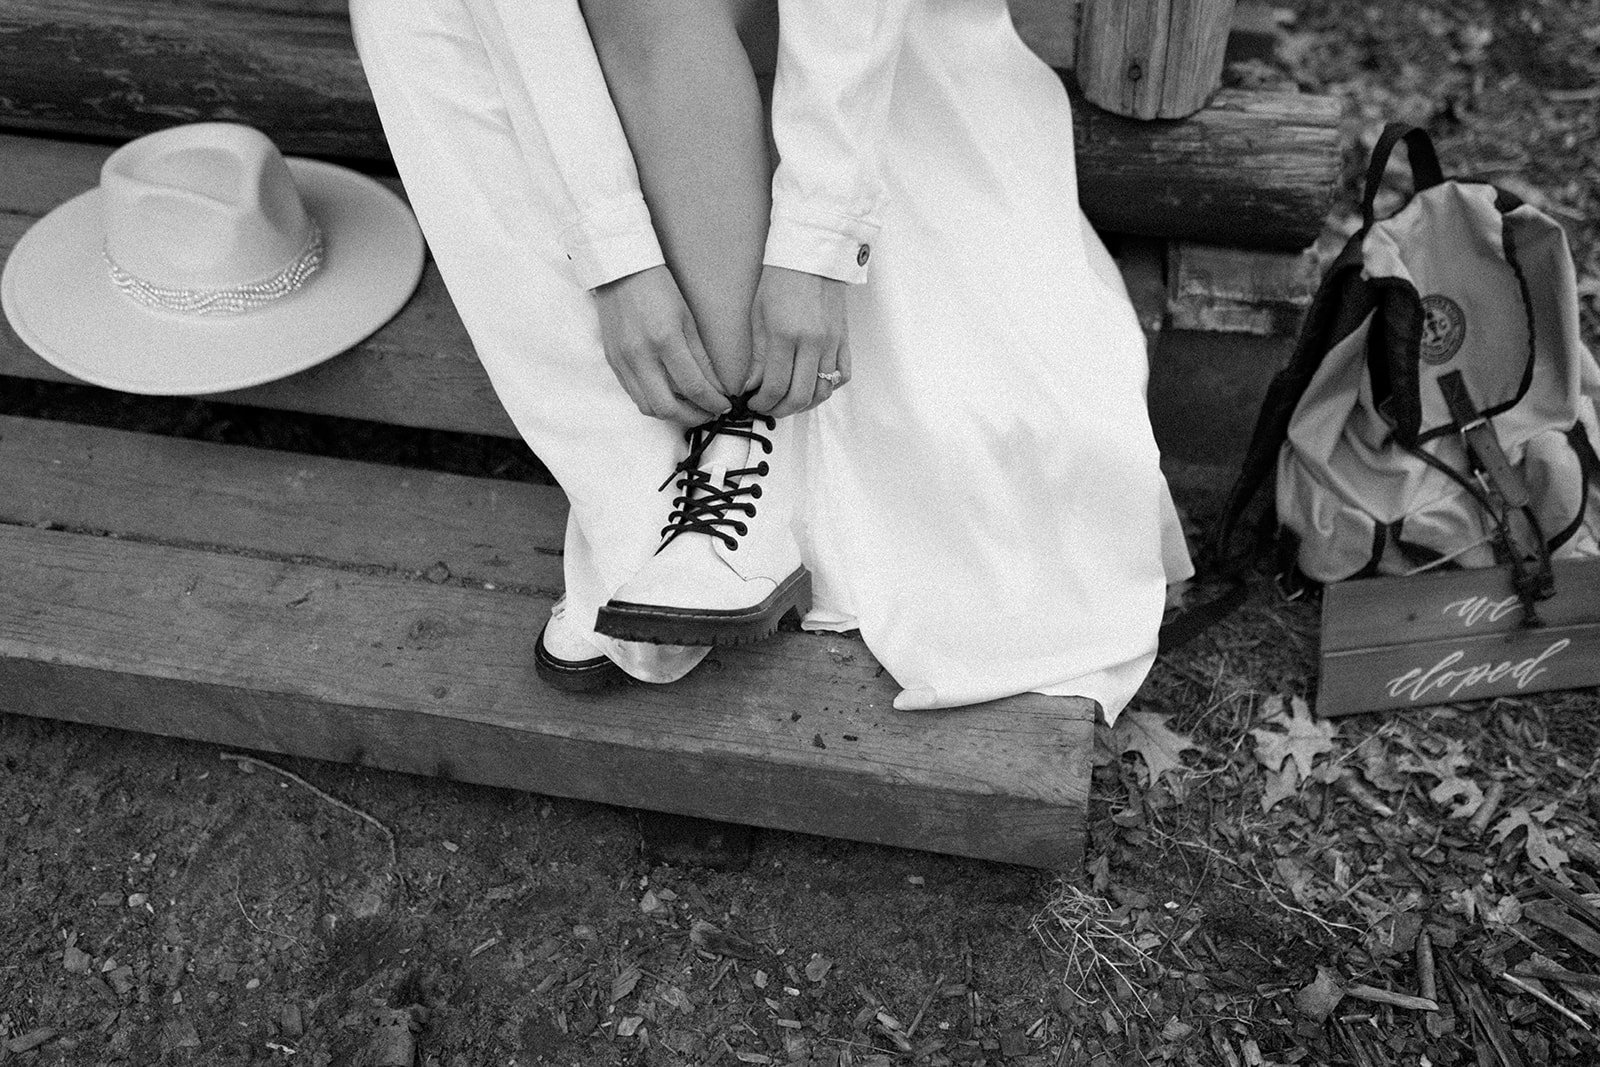 Bride wedding shoes and bridal hat in black and white | Bride style inspiration for adventure elopement